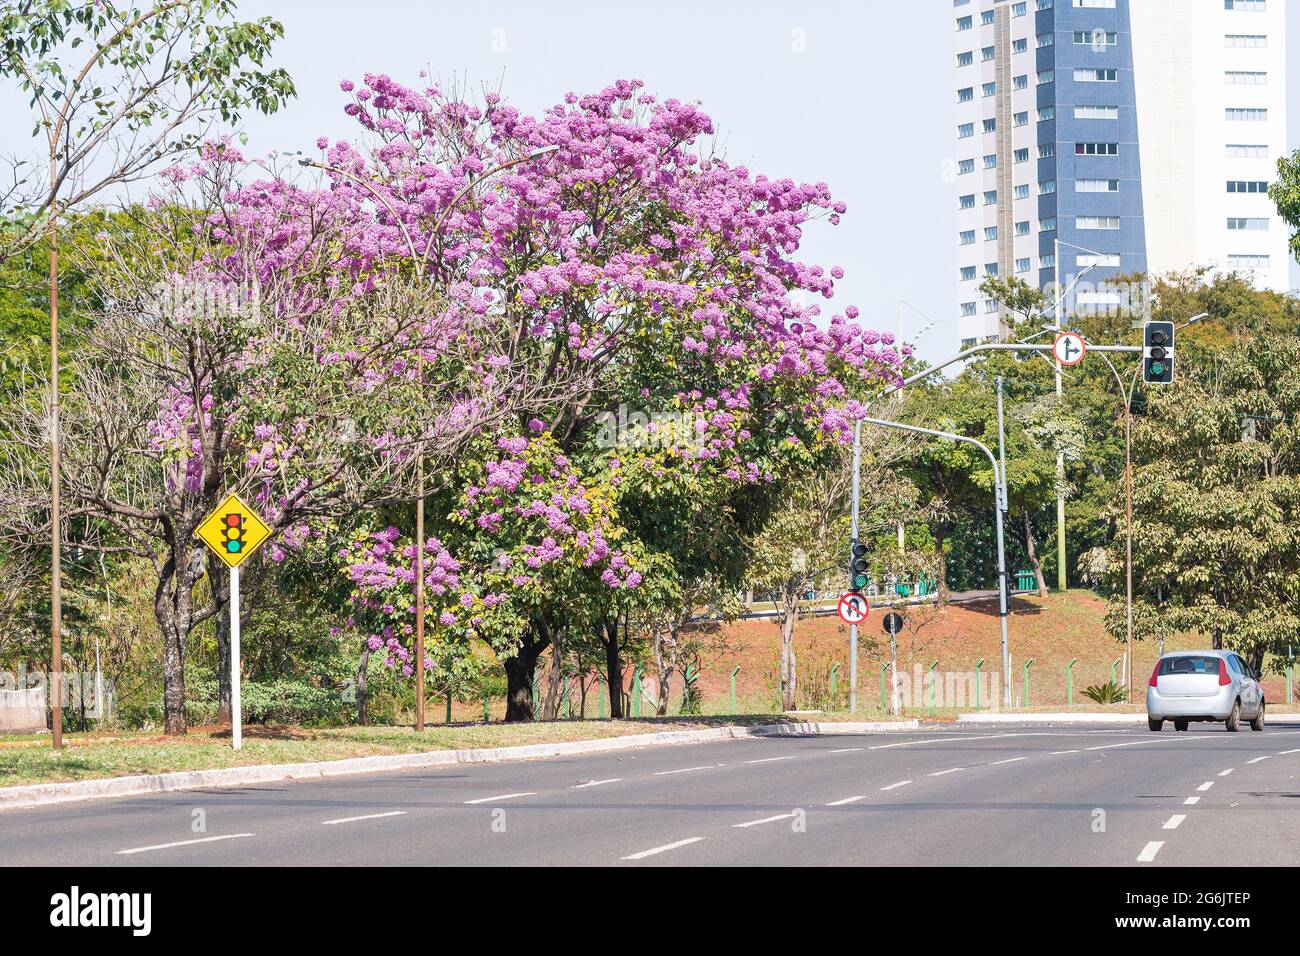 View of a Ipe tree with pink flowers on the central flower bed of Via Park at Campo Grande MS, Brazil. Tree symbol of the city. Stock Photo